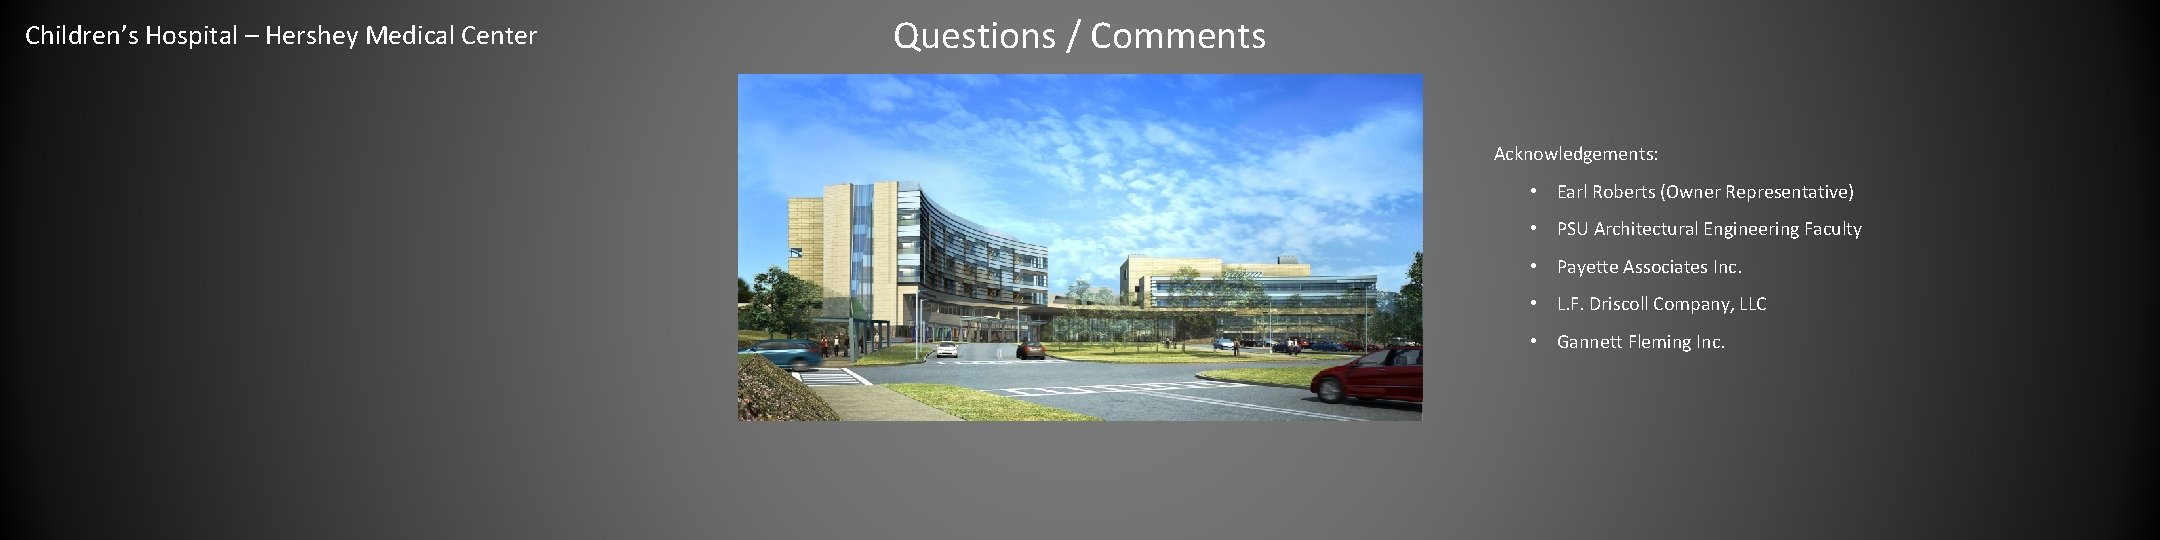 Children’s Hospital – Hershey Medical Center Questions / Comments Acknowledgements: • Earl Roberts (Owner